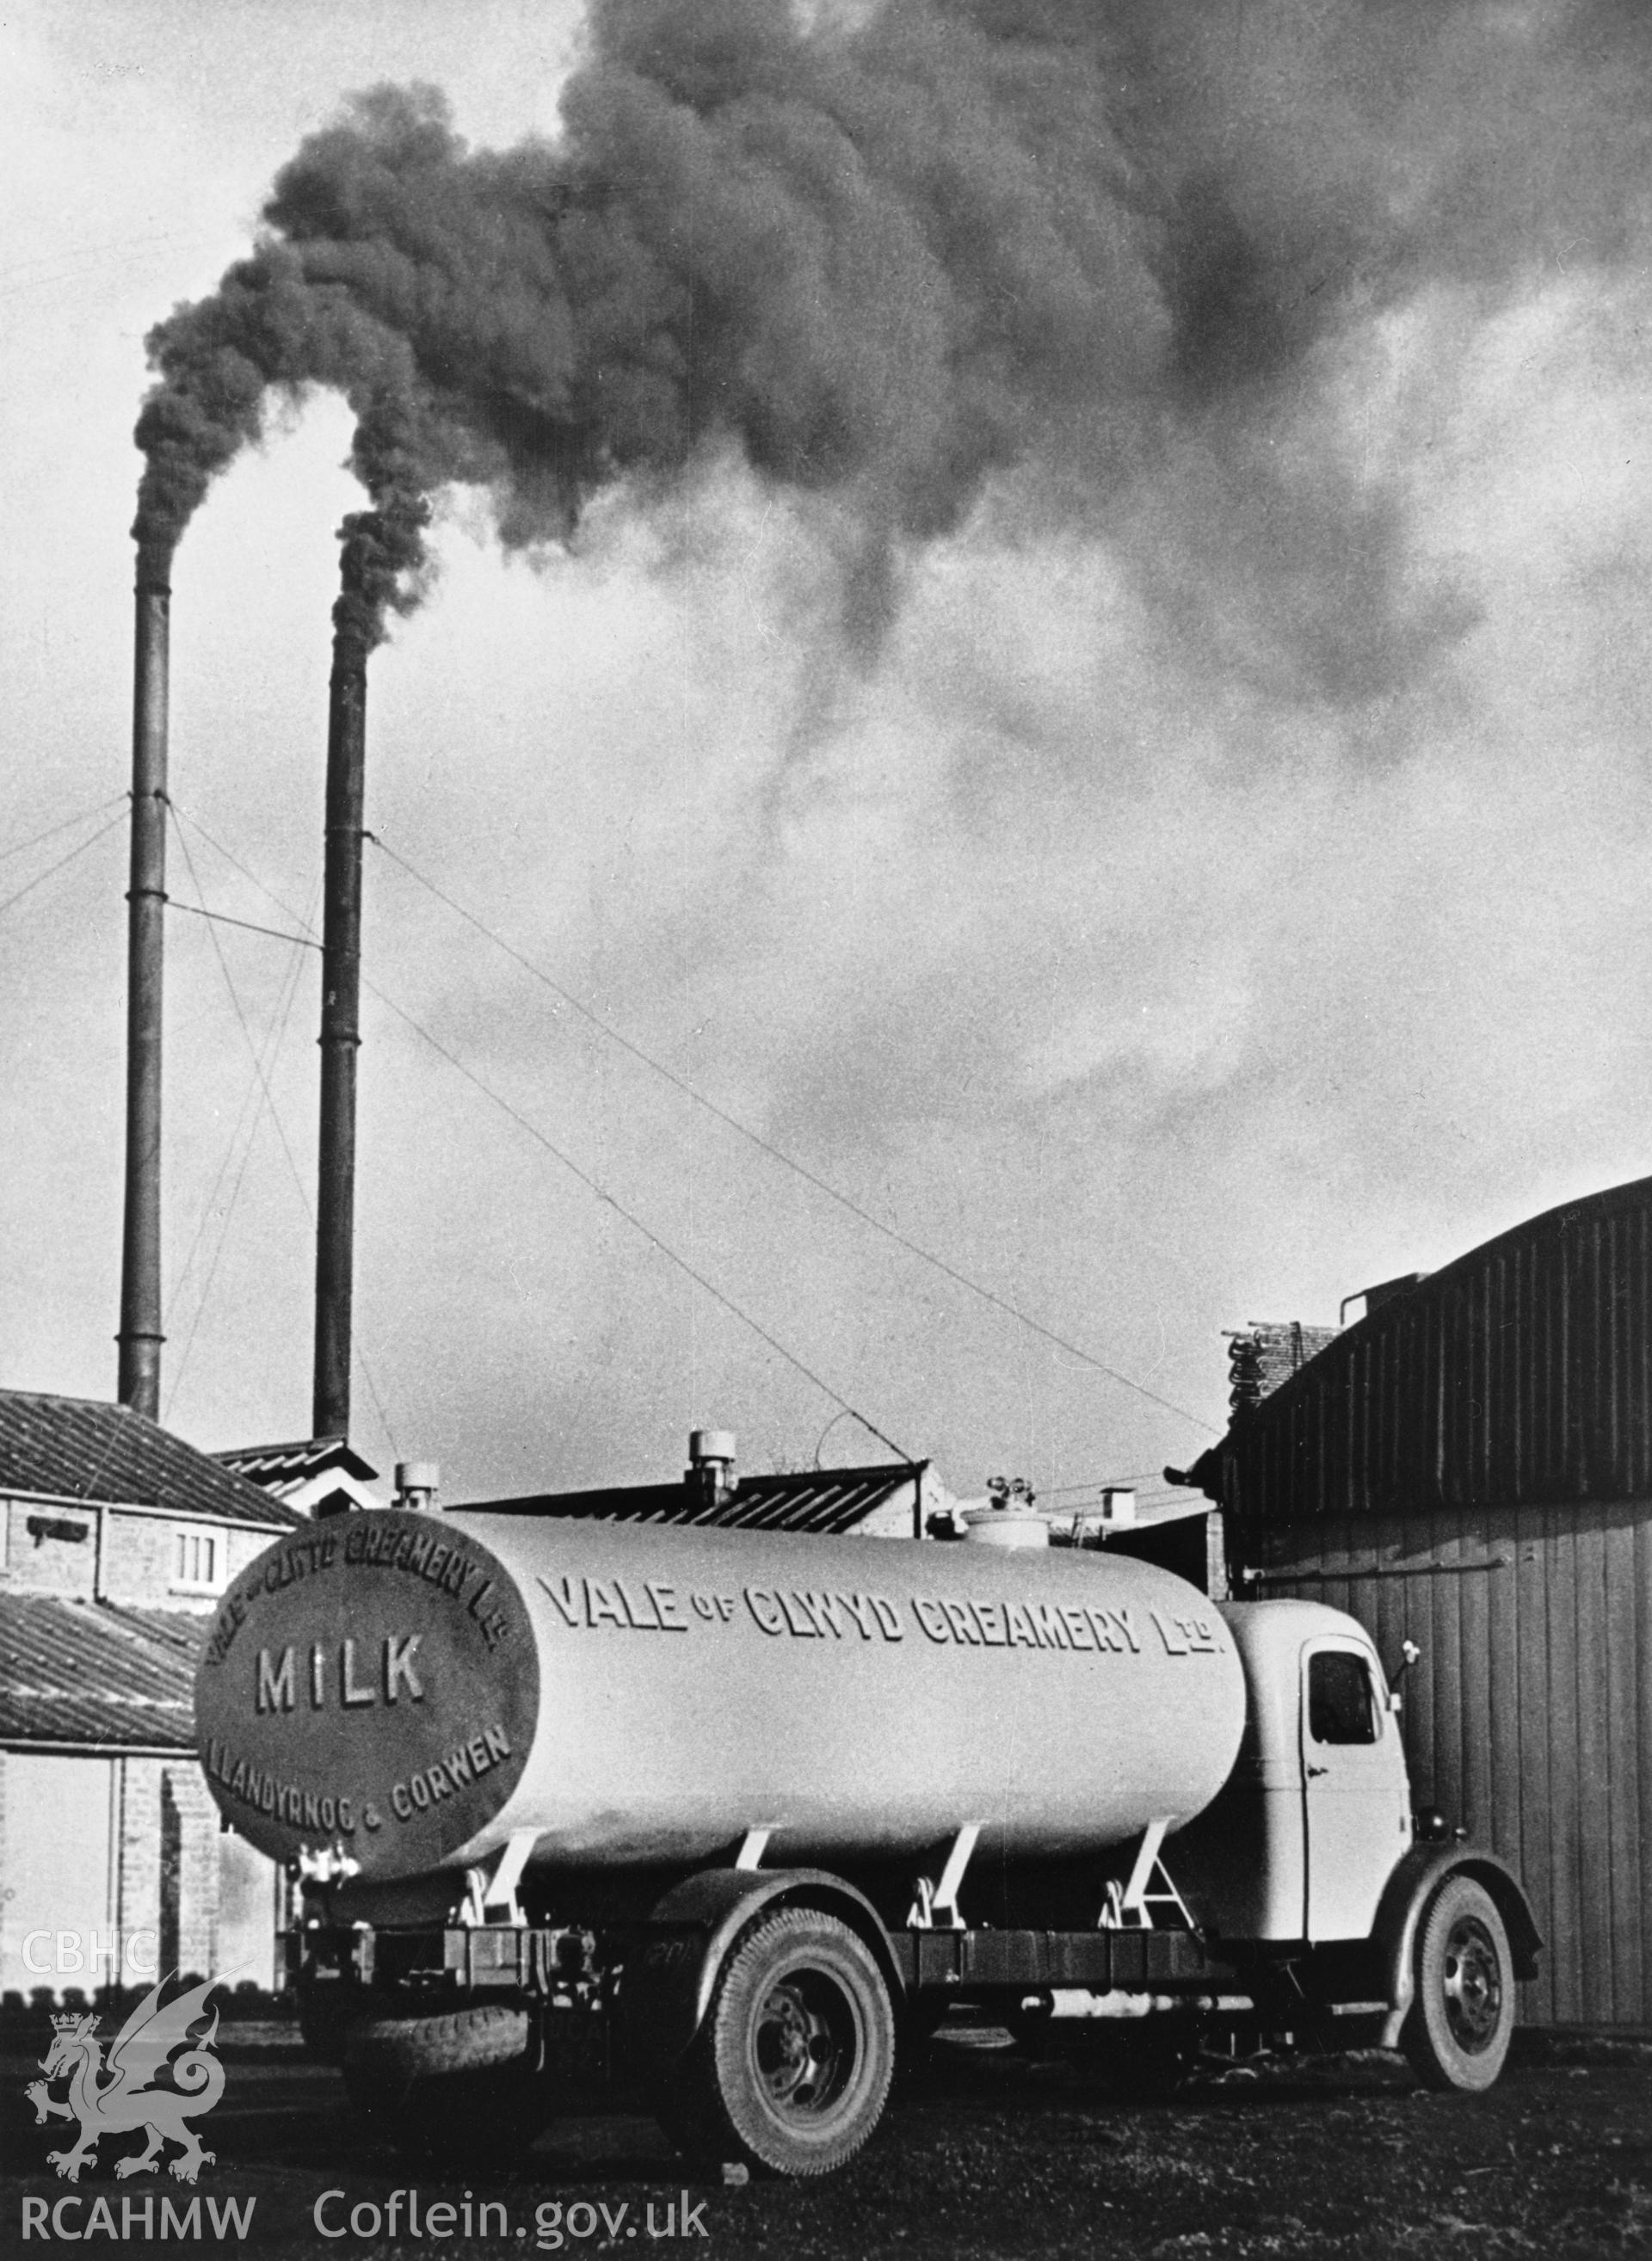 Copy of pre 1950 photo showing milk tanker at the Creamery